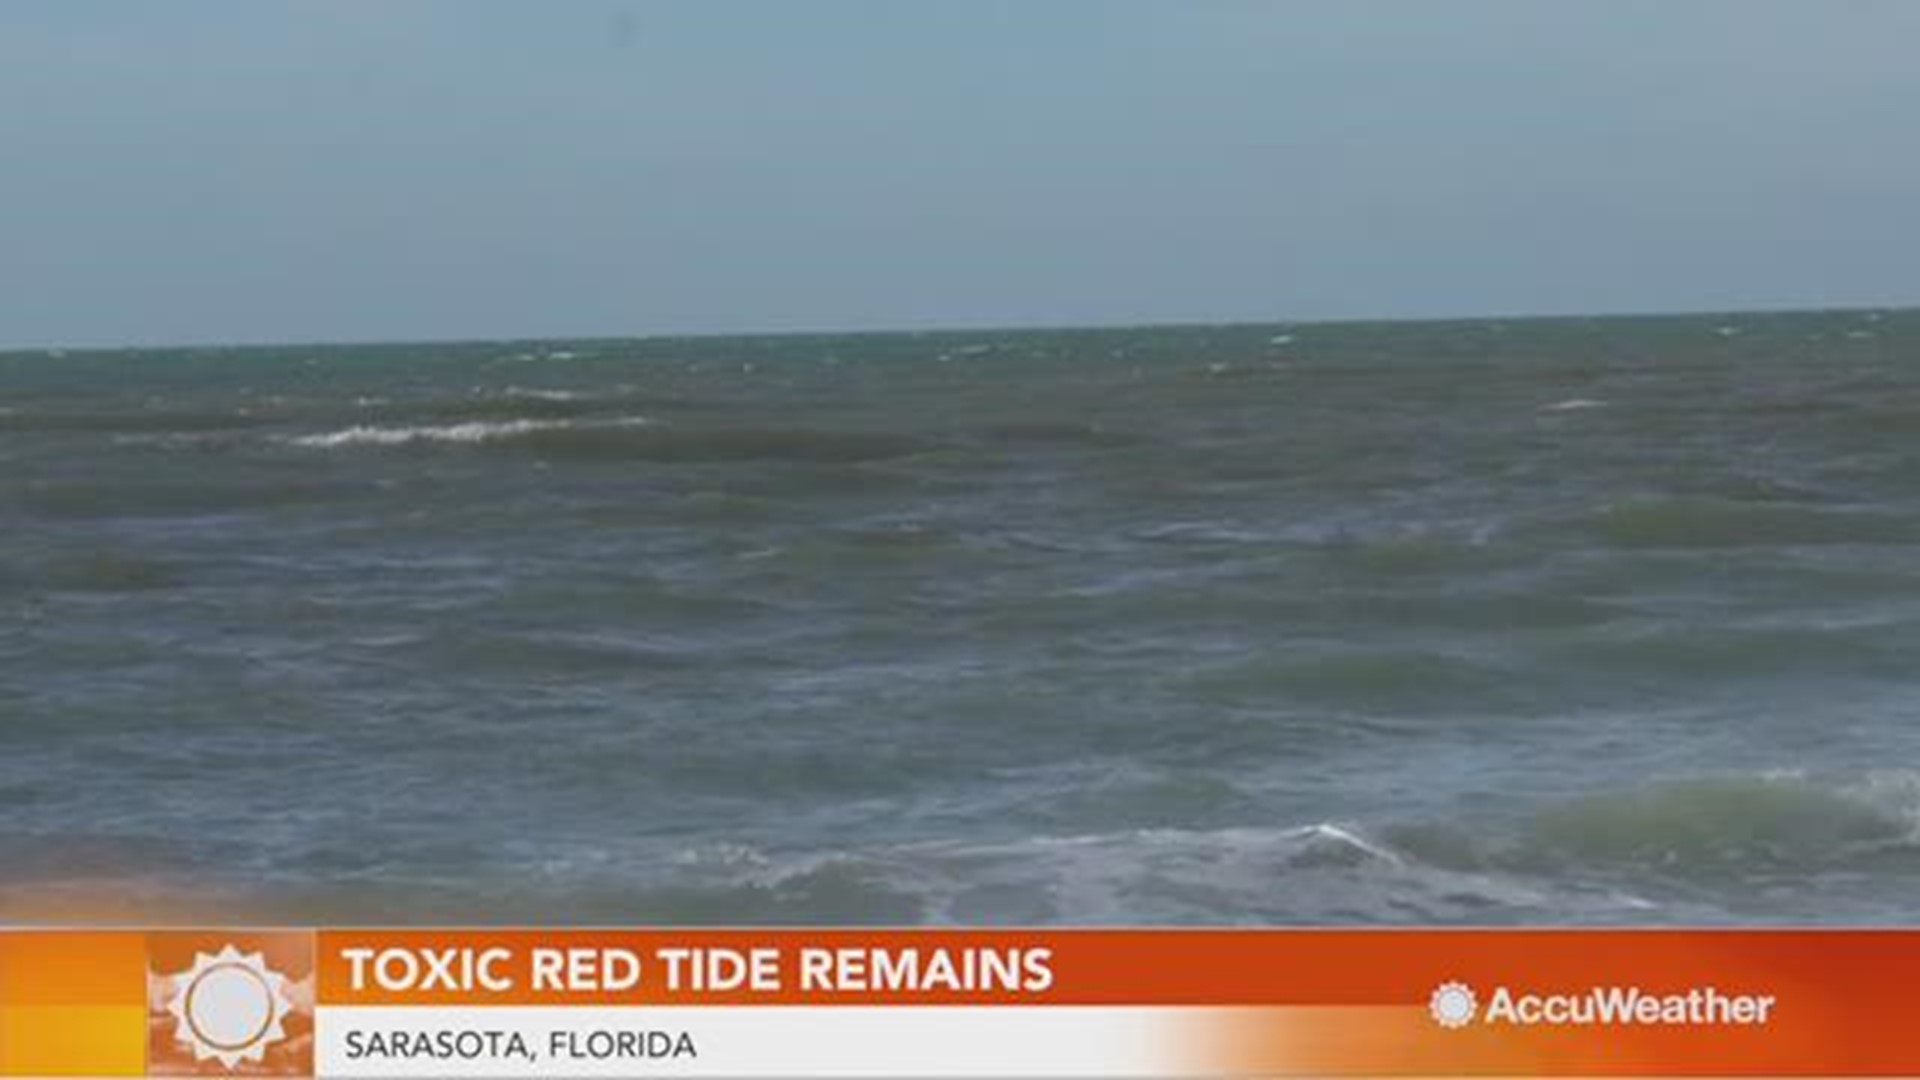 Patches of a massive red tide algae bloom remain off of Florida's Gulf Coast, especially near Sarasota, affecting beach goers, while all scientists can do is monitor.